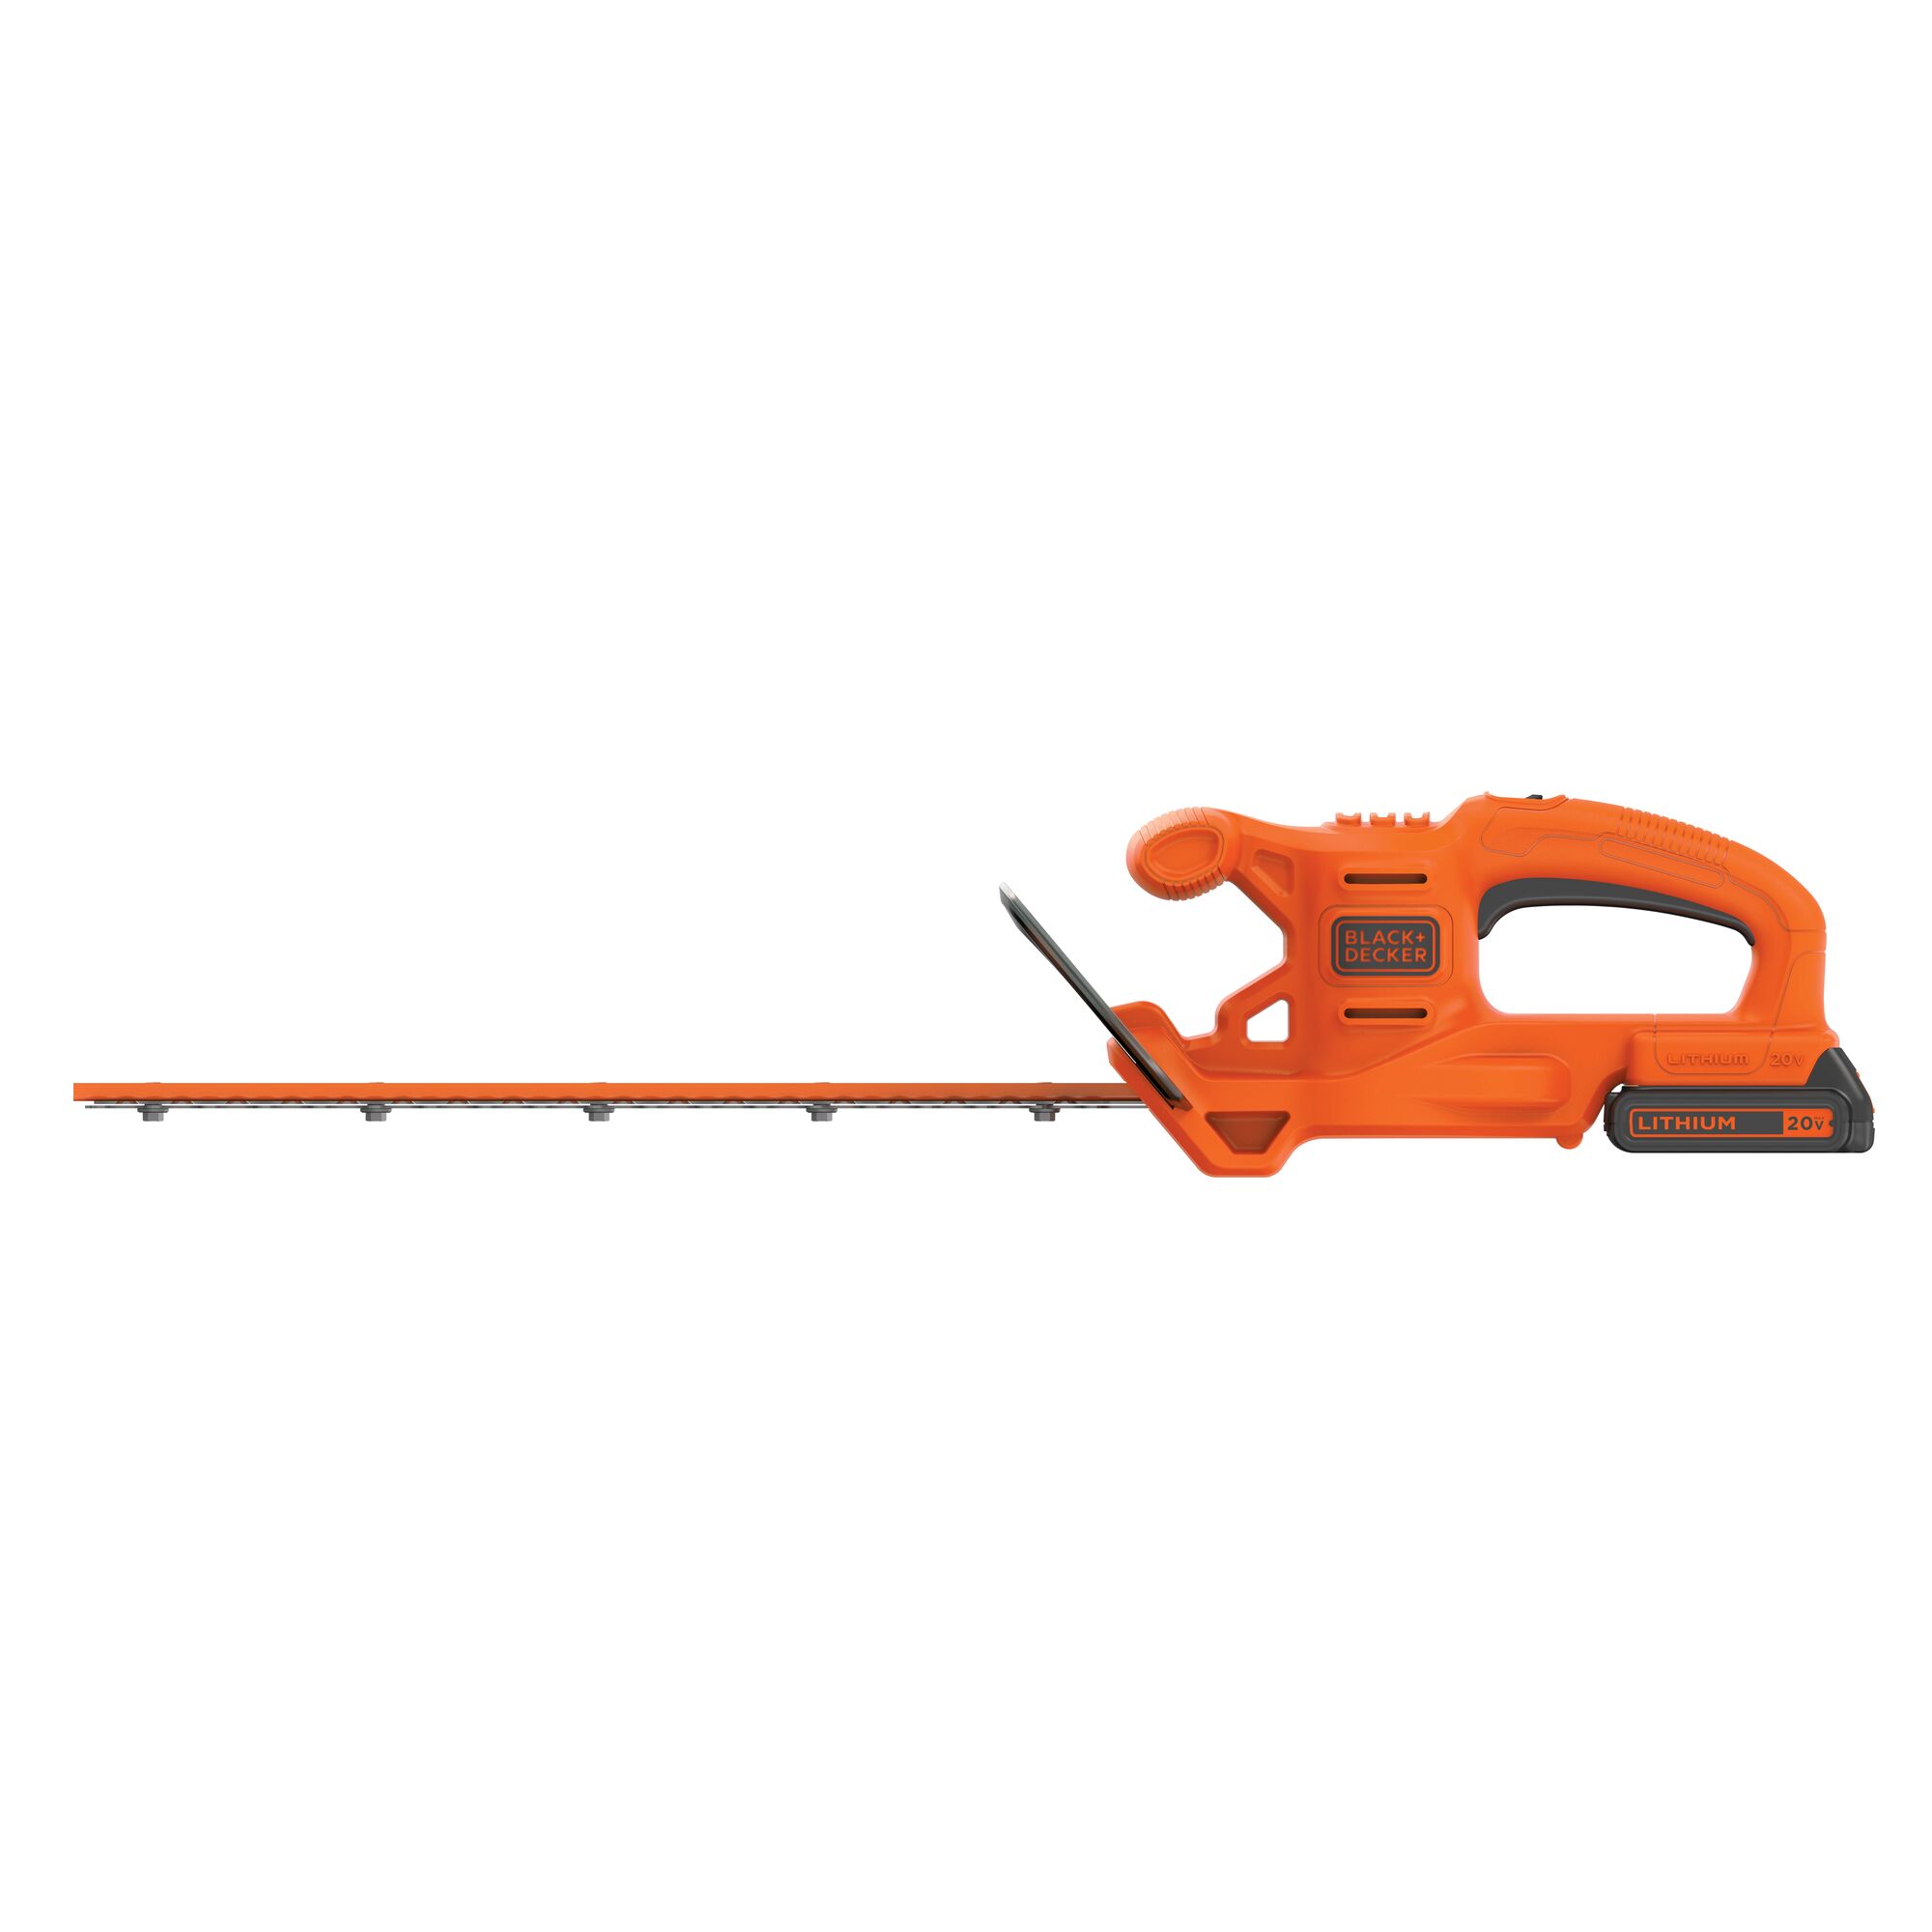 Profile of 20 volt max 18 inch cordless hedge trimmer.